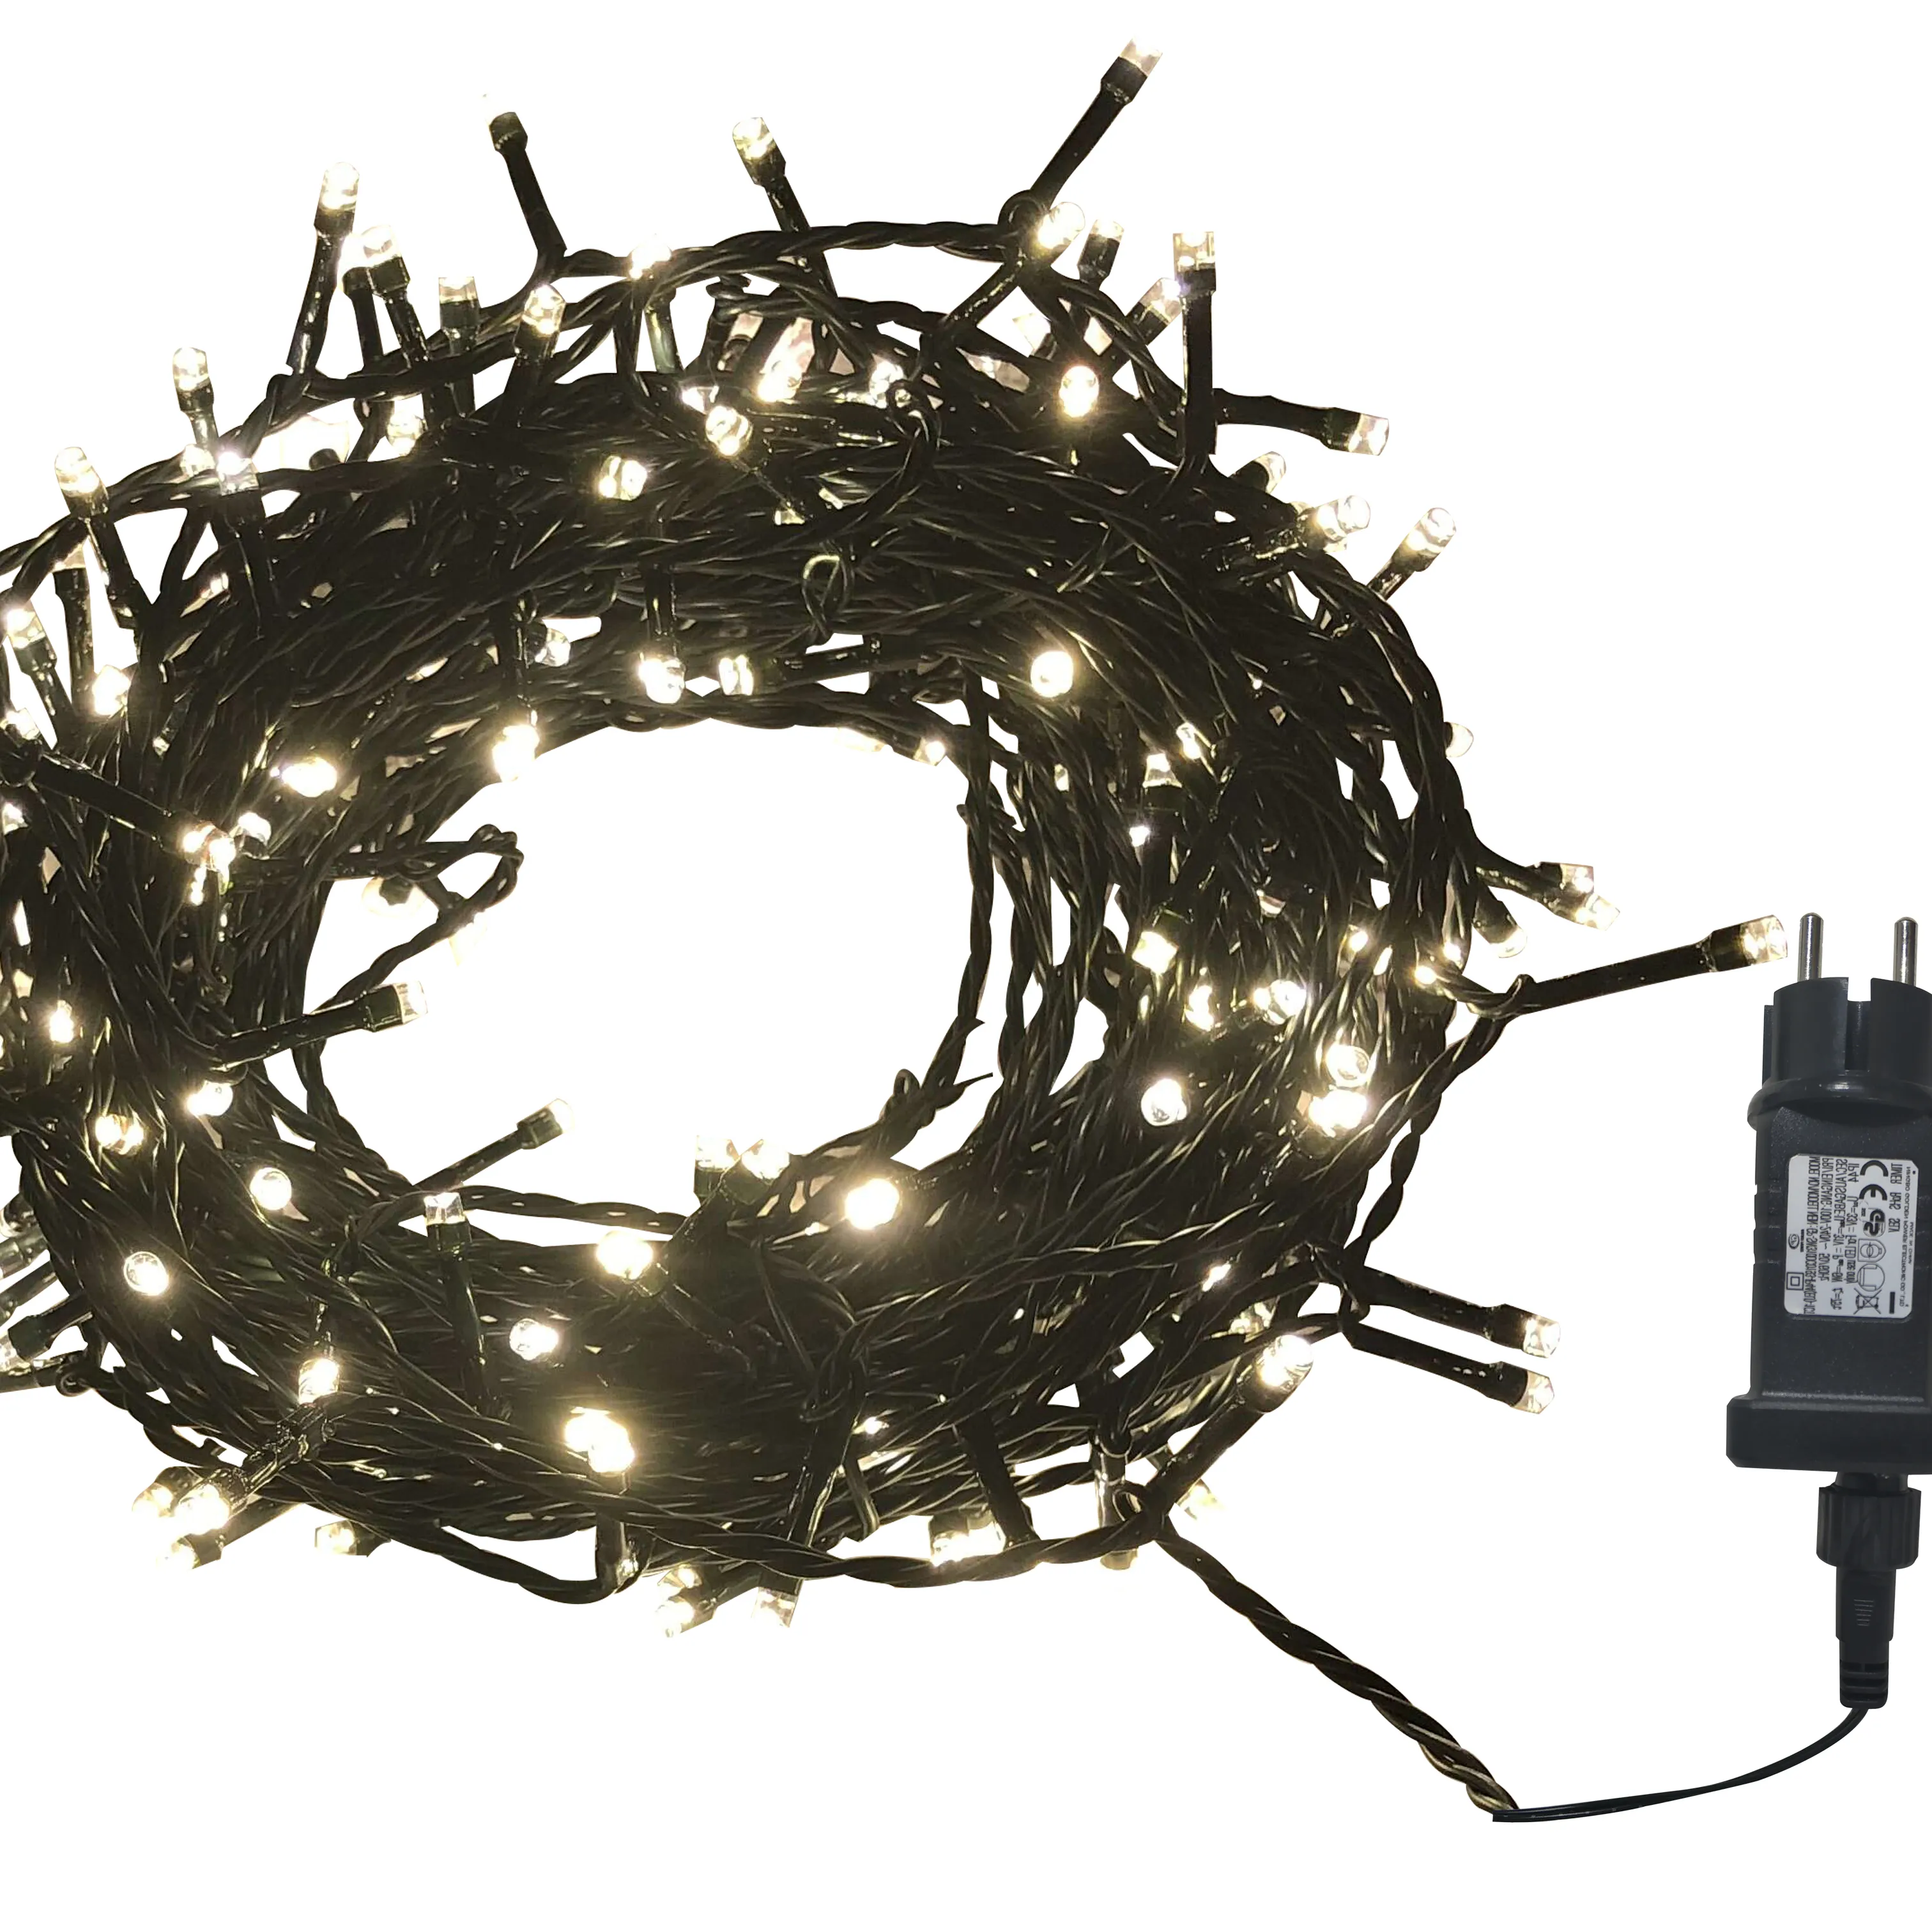 Outdoor Waterproof Light String Christmas Decorative LED String Light Holiday Wedding Indoor Clear Black Choice Luminous Party